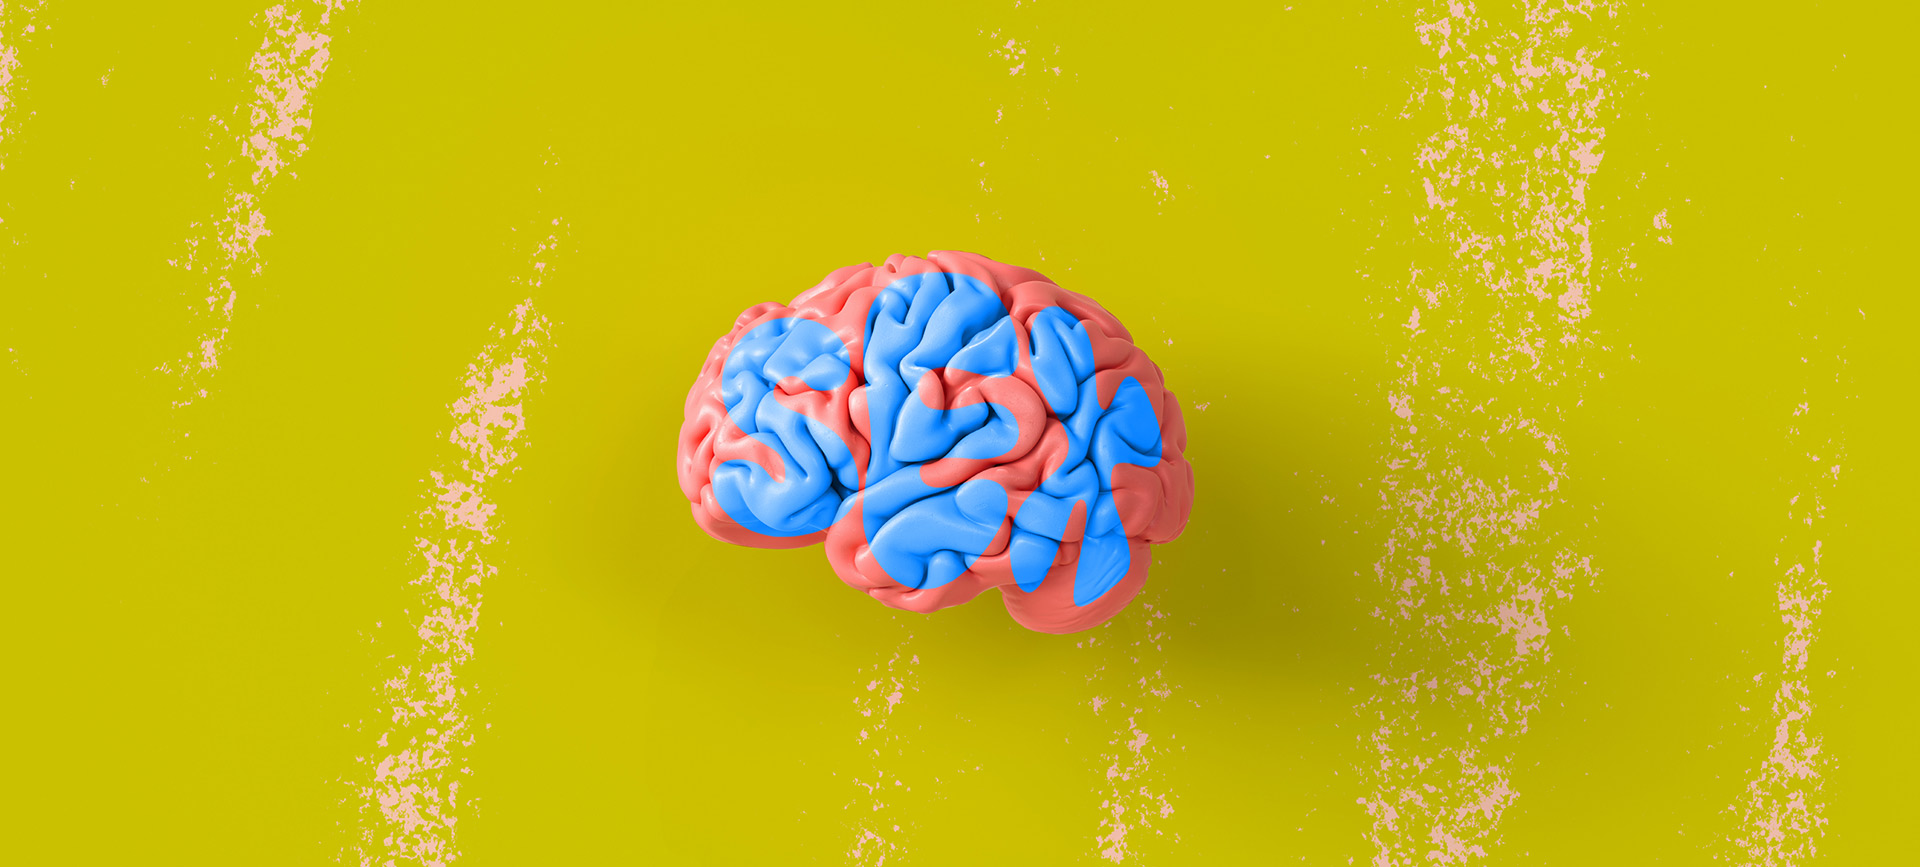 A pink brain sits against a yellow background with the word sex written over it in blue.